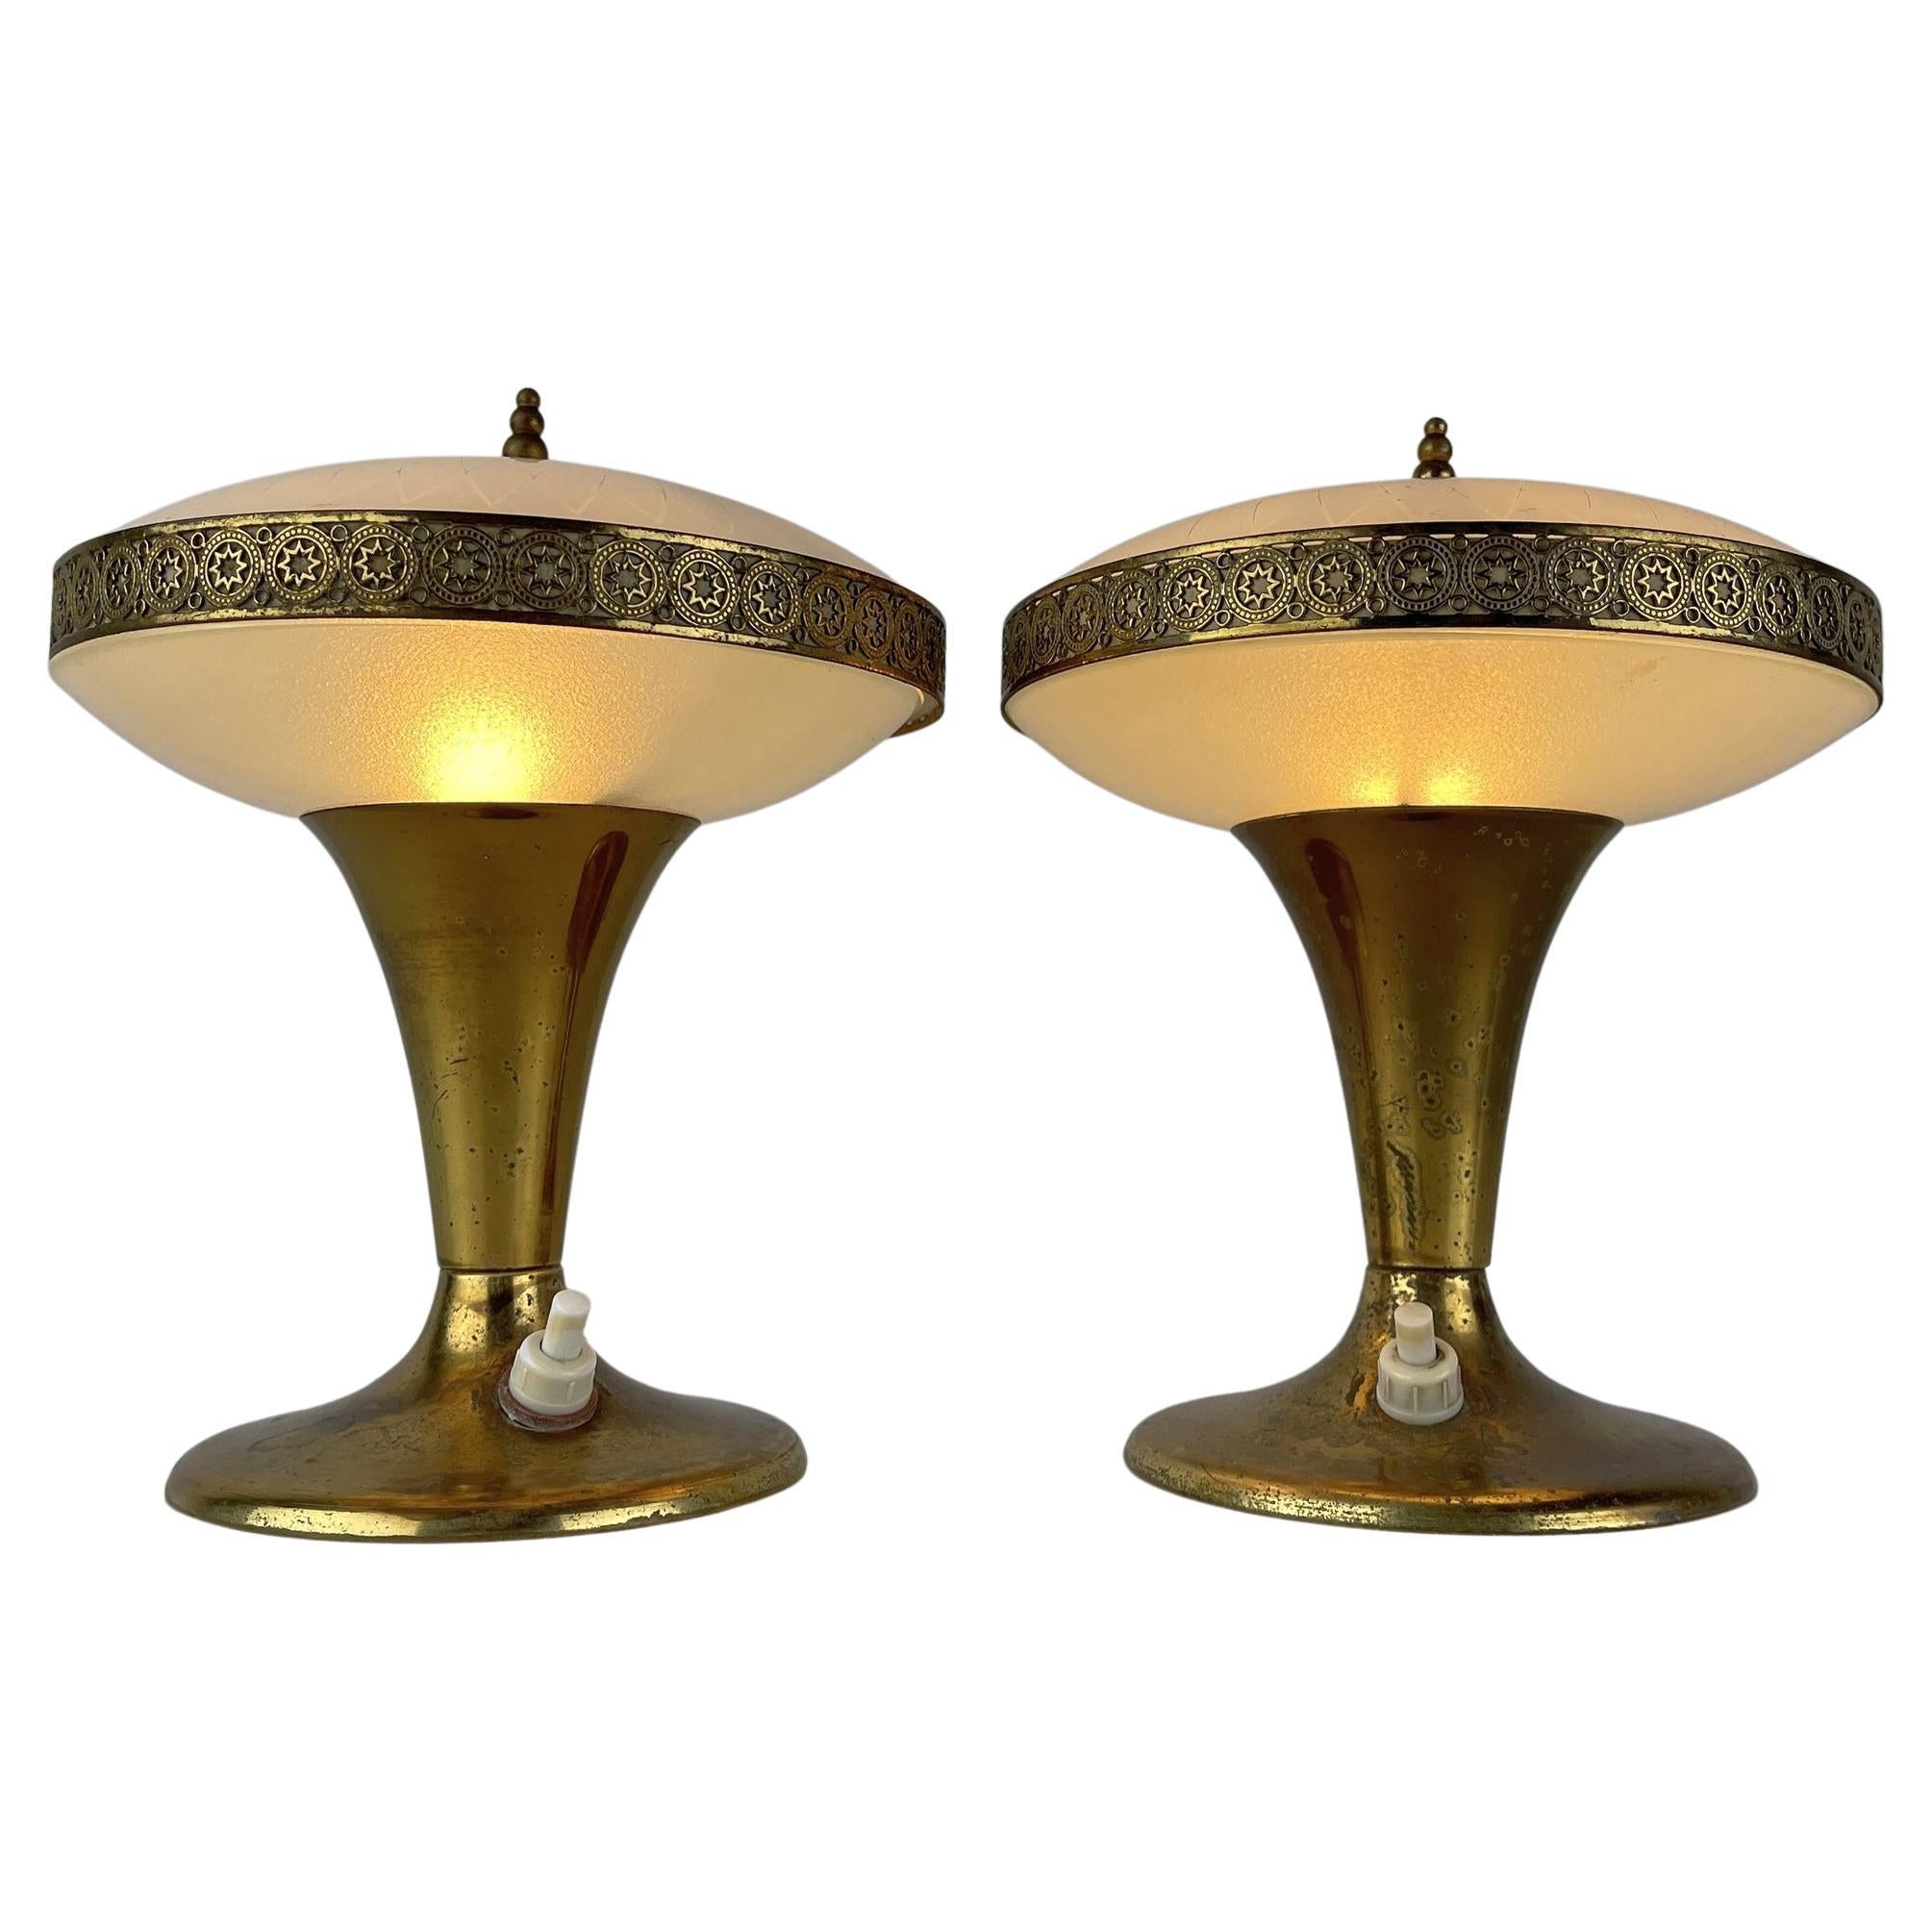 Pair of 2 Mid-Century Table Lamps Italy 1950s Space Age Light UFO